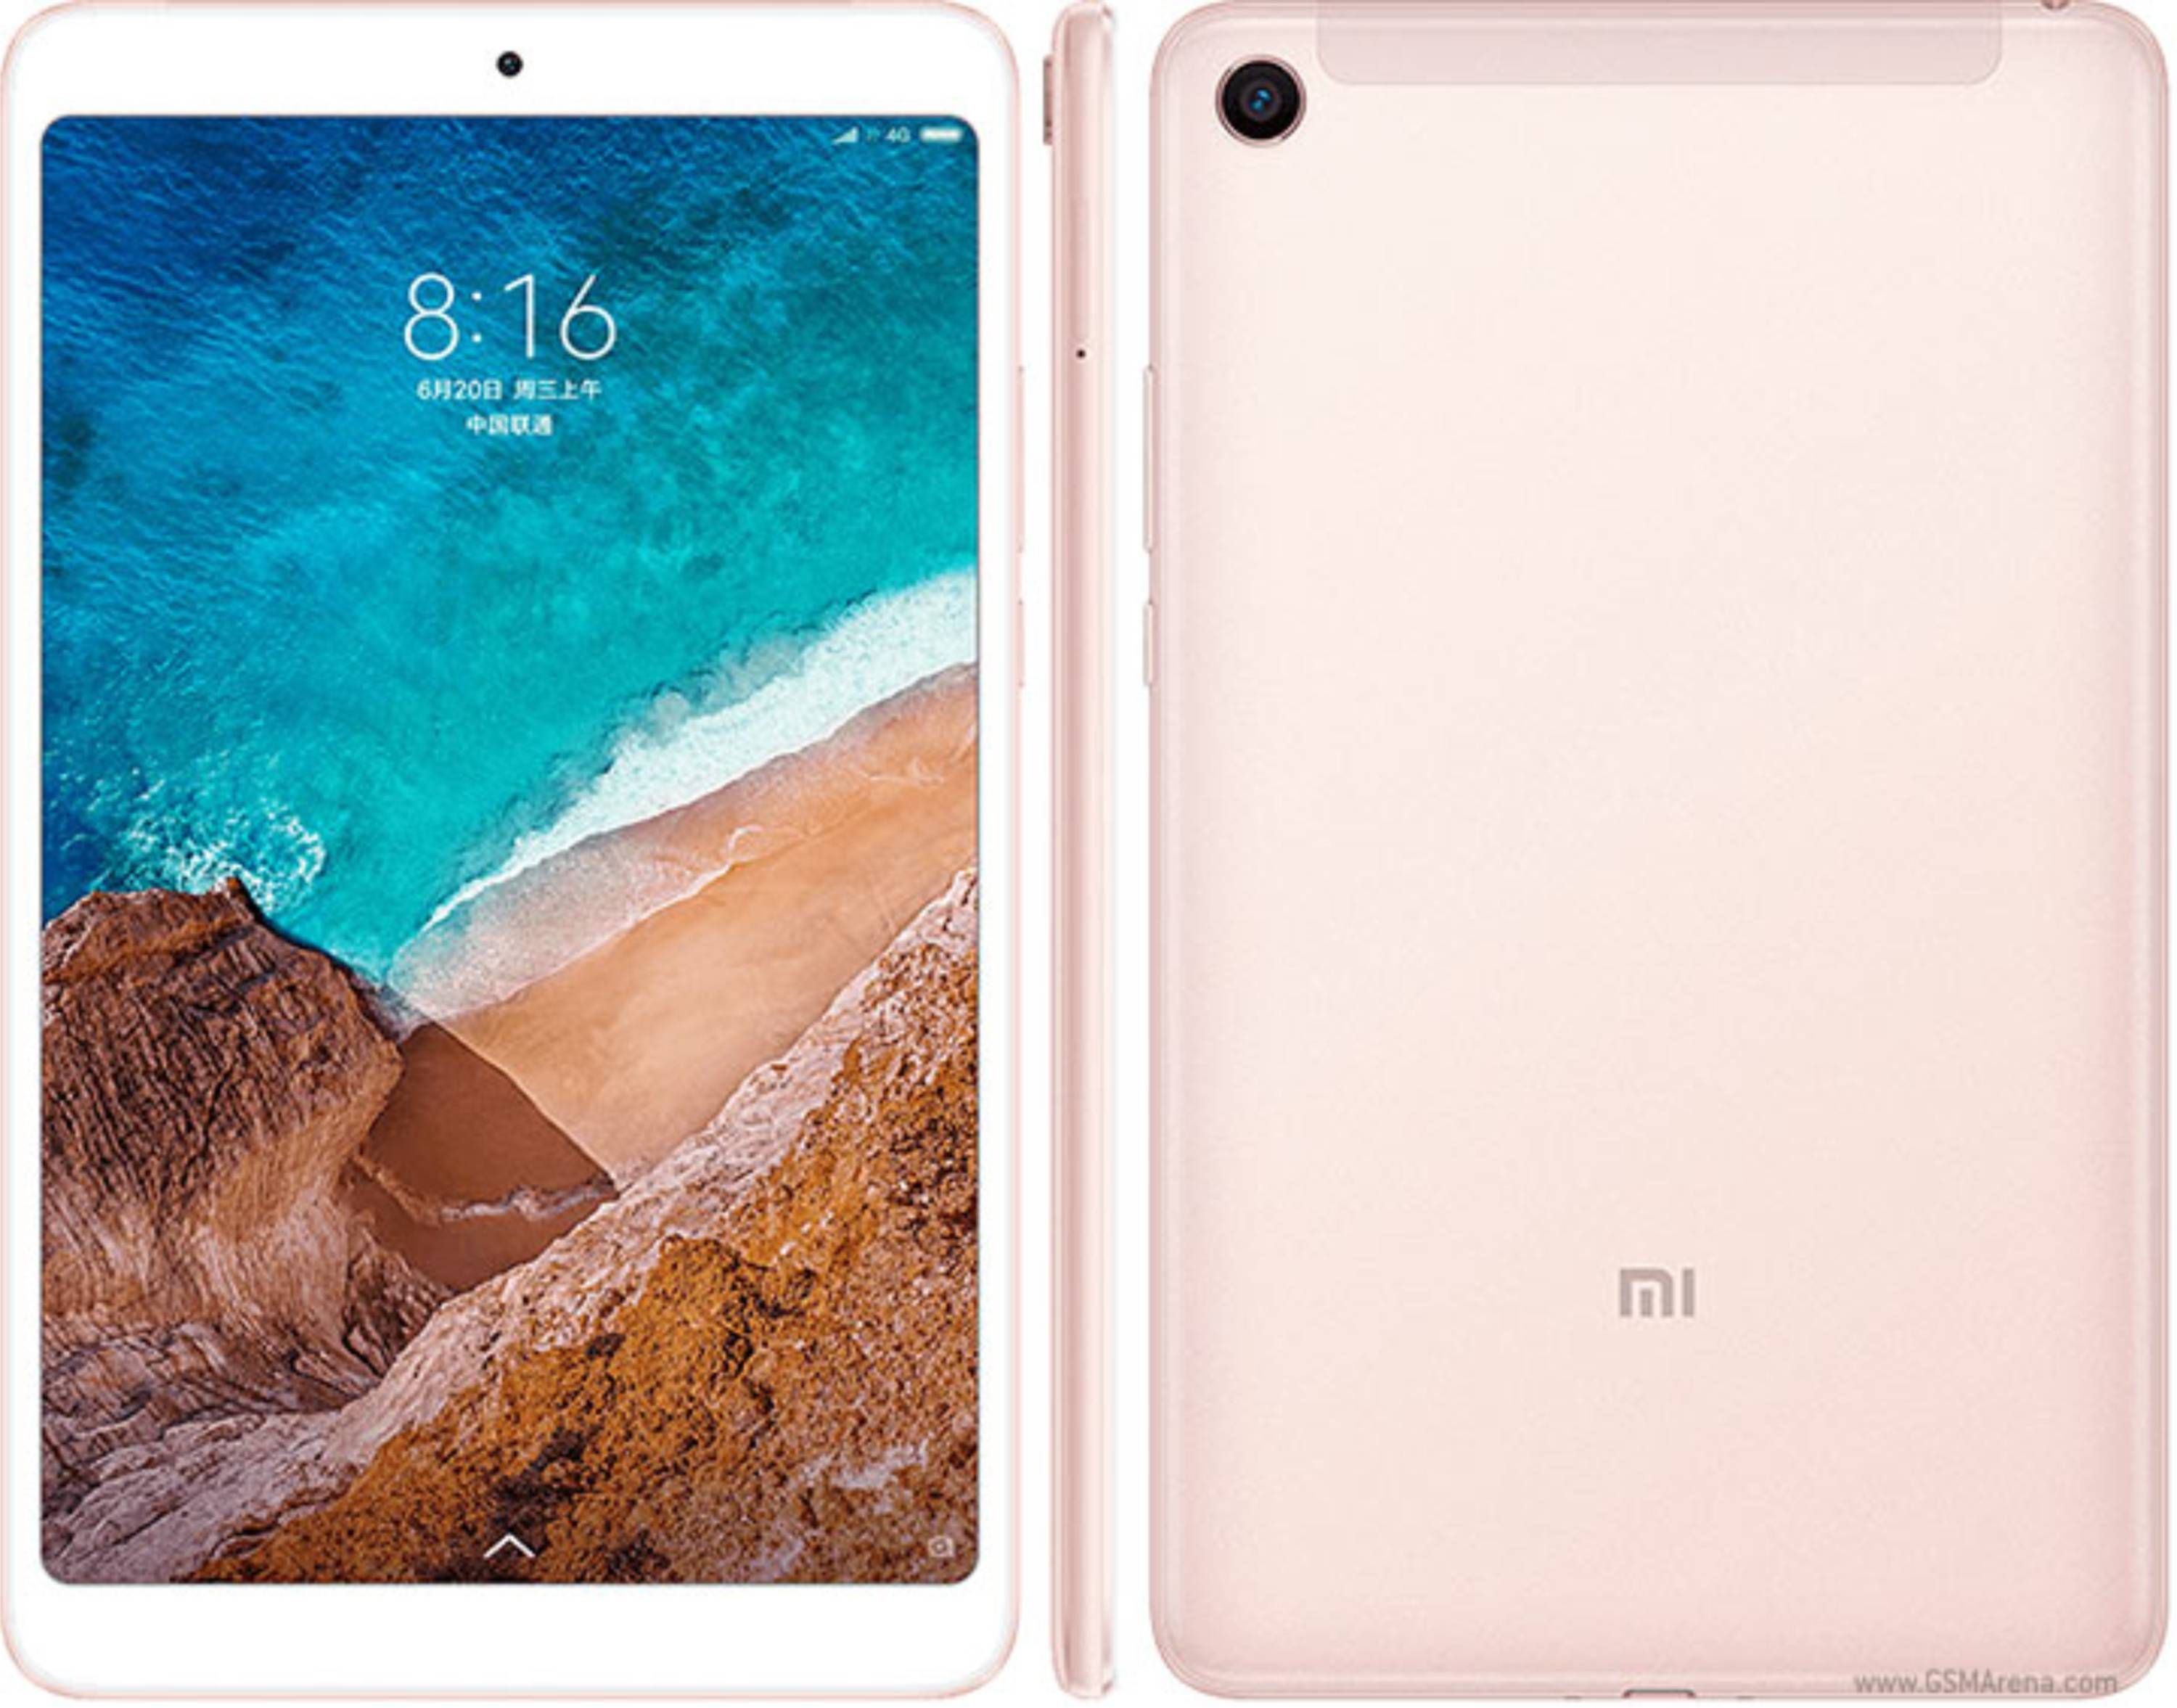 Xiaomi Mi Pad 4 Specifications and Price in Kenya